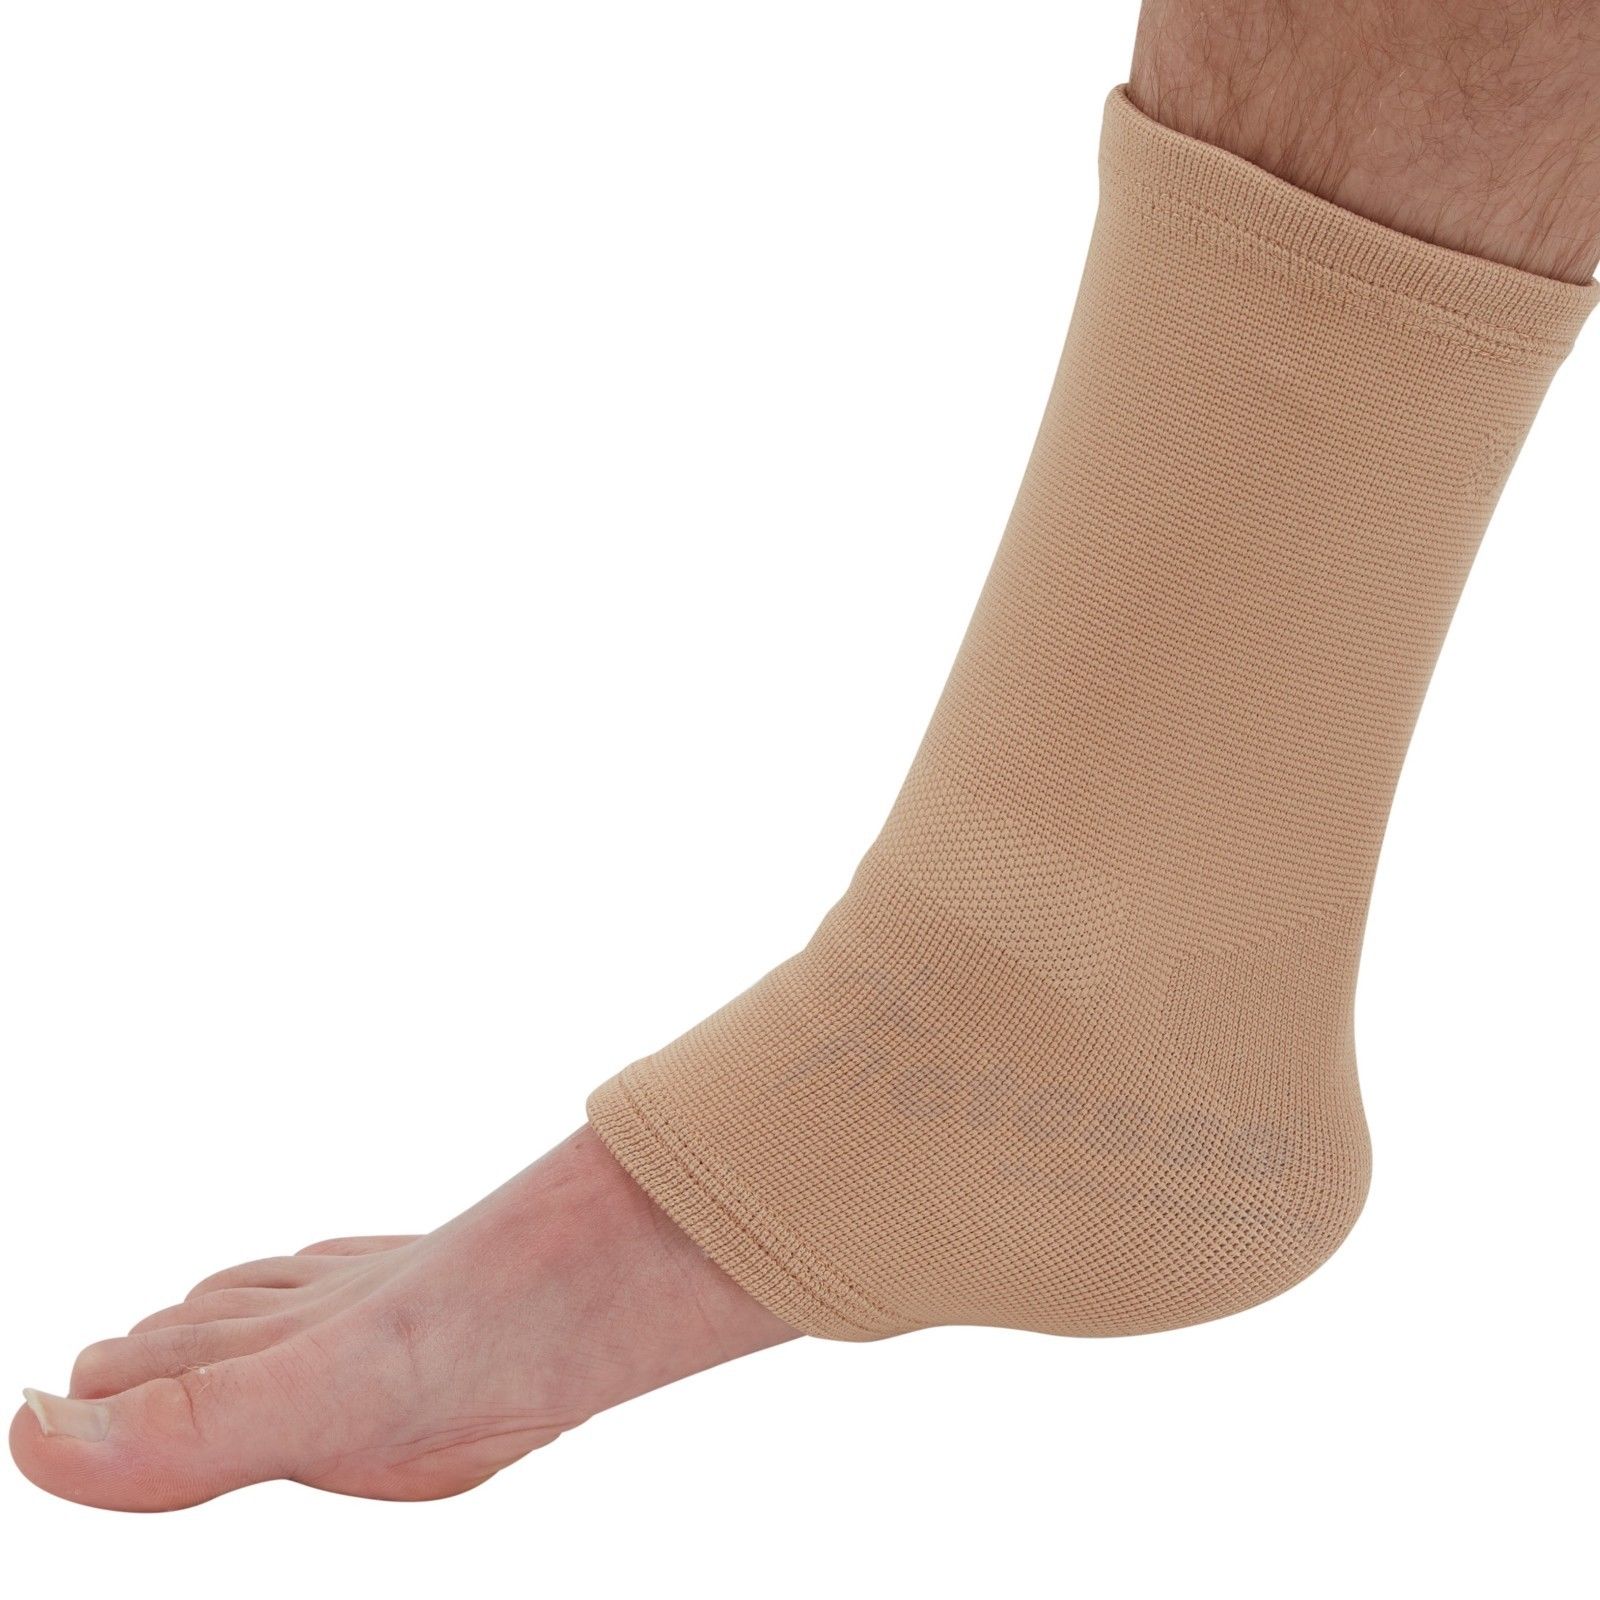 Elastic Ankle Support Pull-on Sleeve Ankle Wrap Compression Sports ...